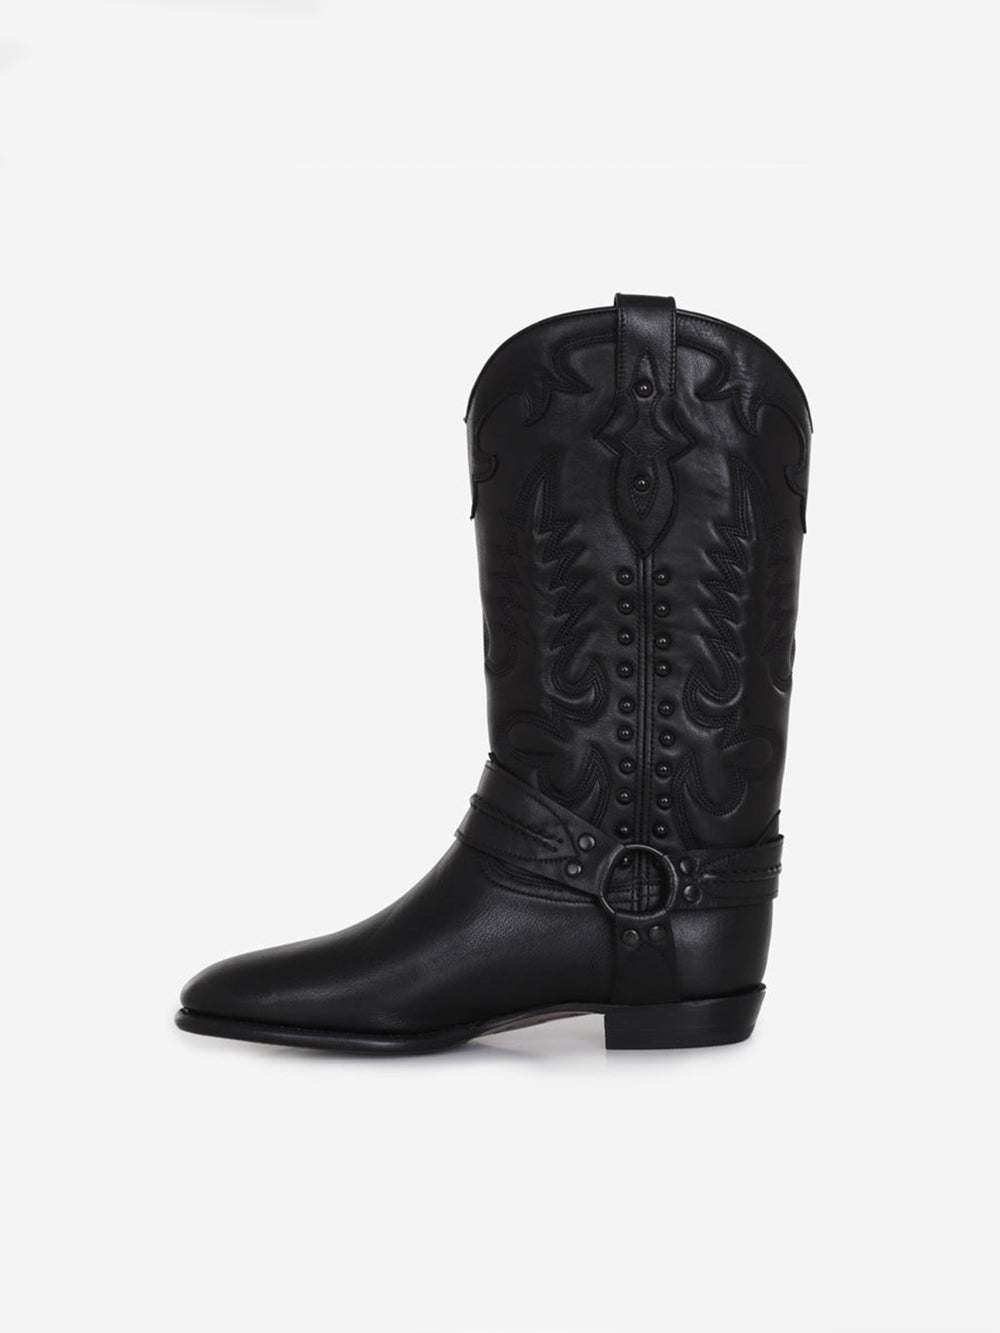 LEATHER RIDER BOOTS